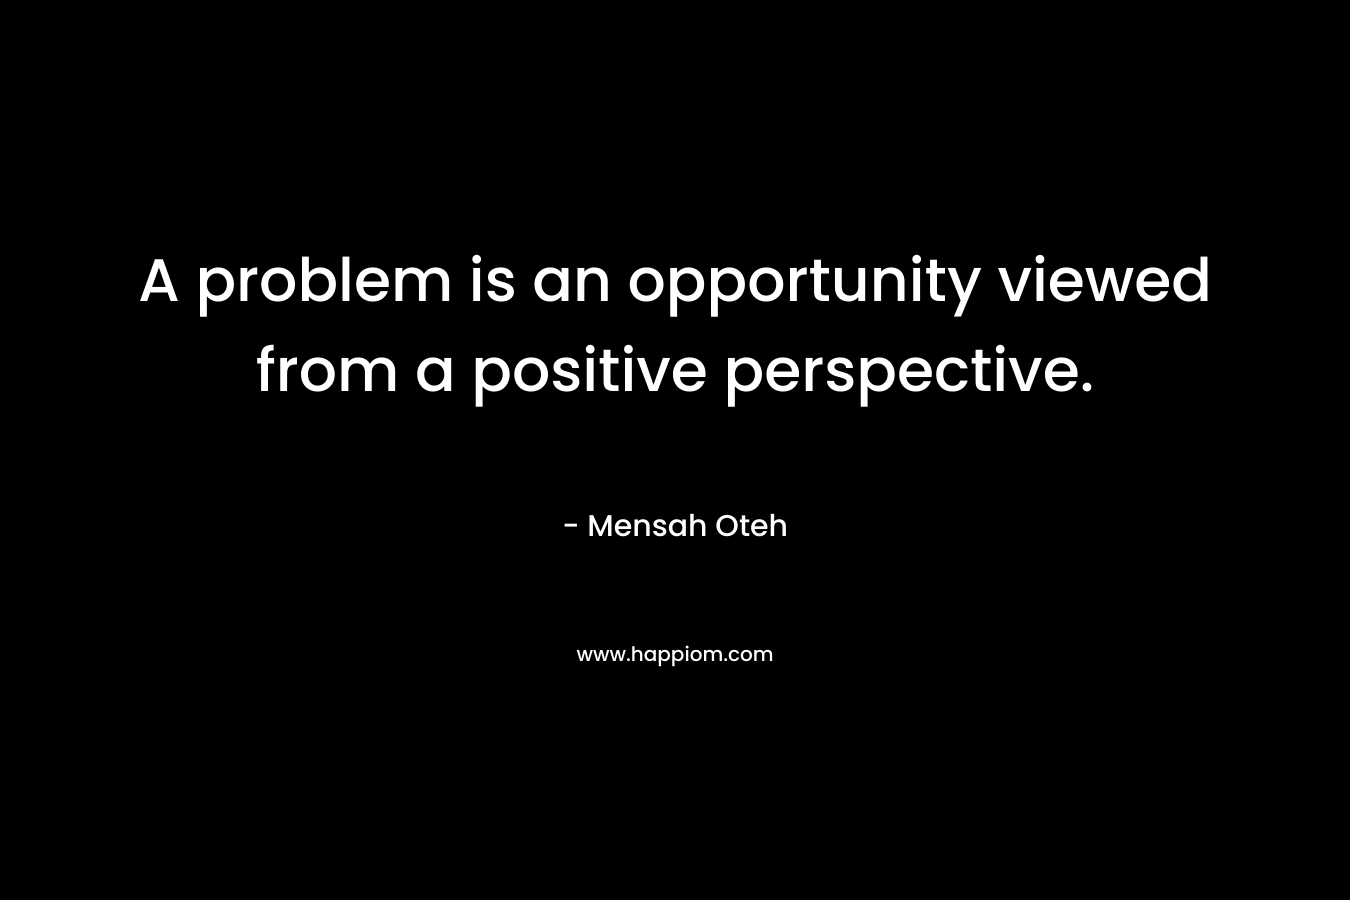 A problem is an opportunity viewed from a positive perspective.